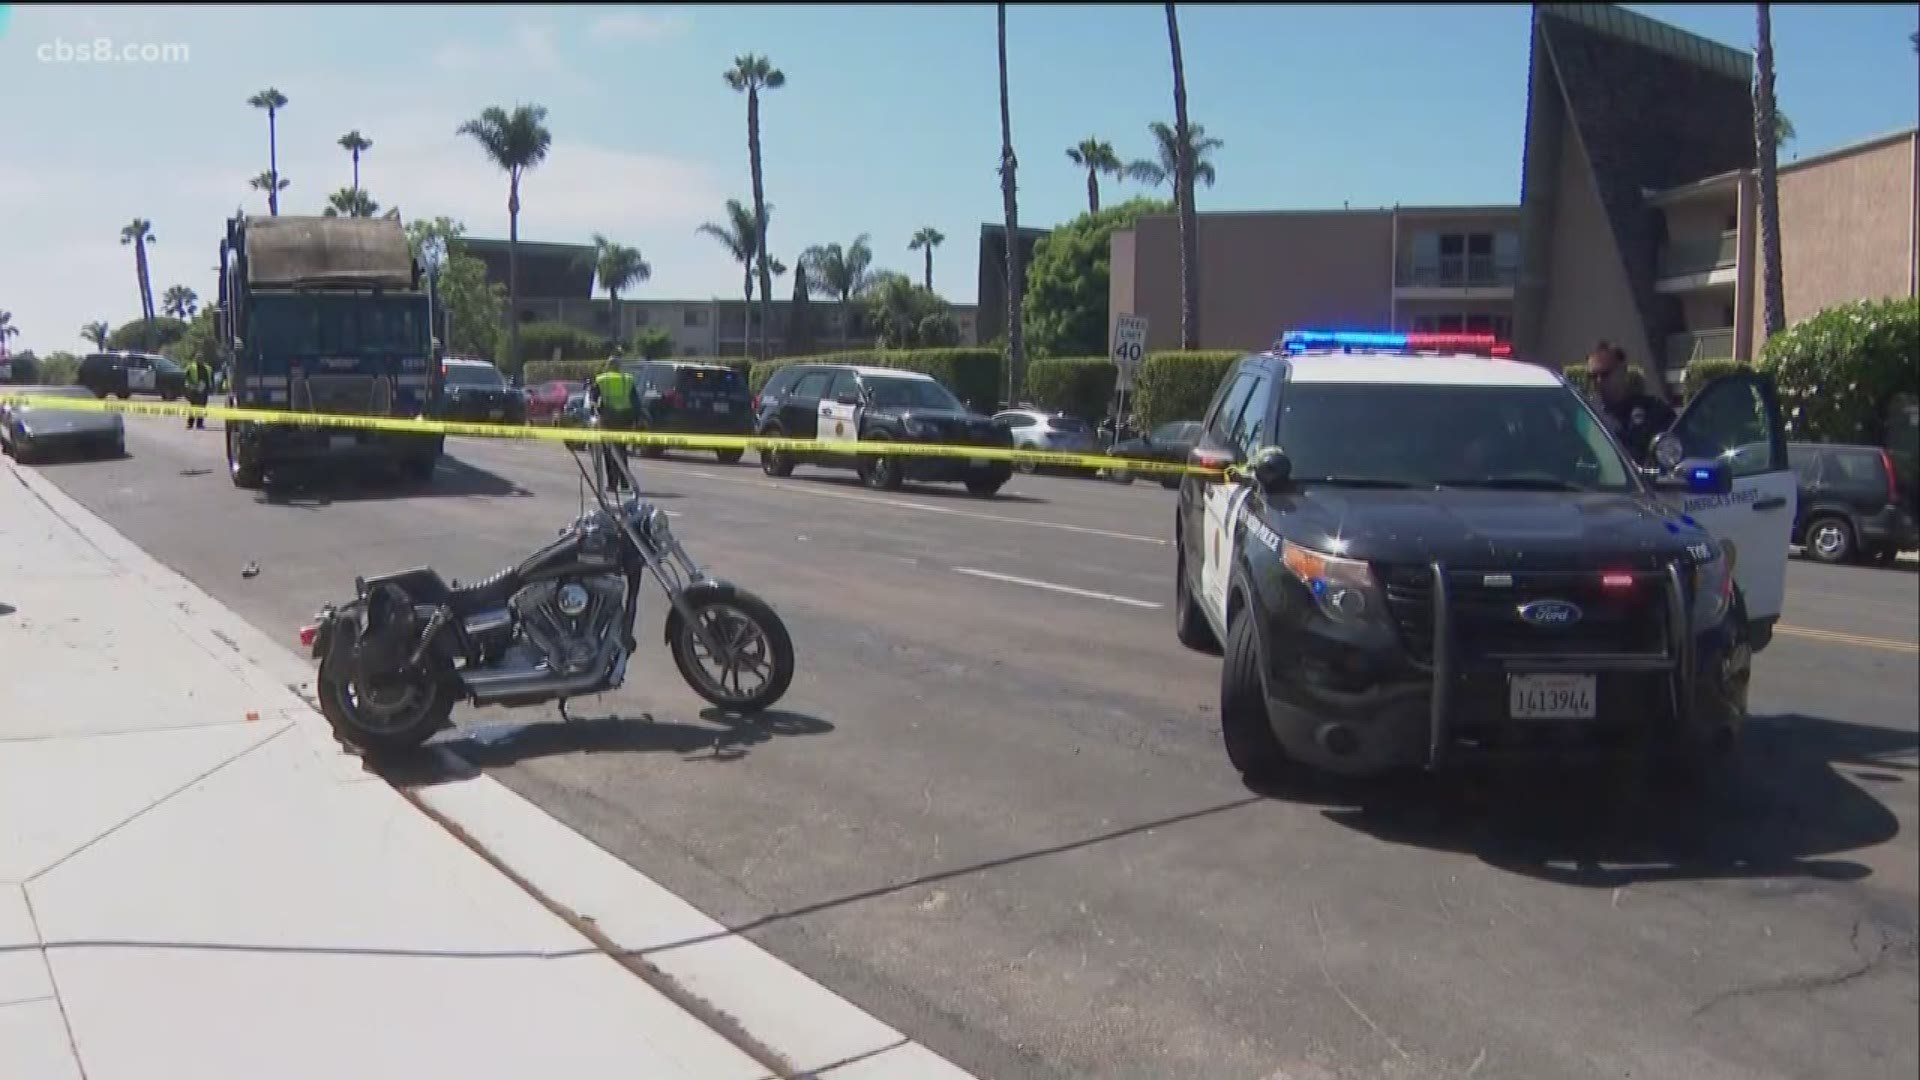 23-year-old white male on a Harley Davidson motorcycle was transported to the hospital with fracture to his left leg.